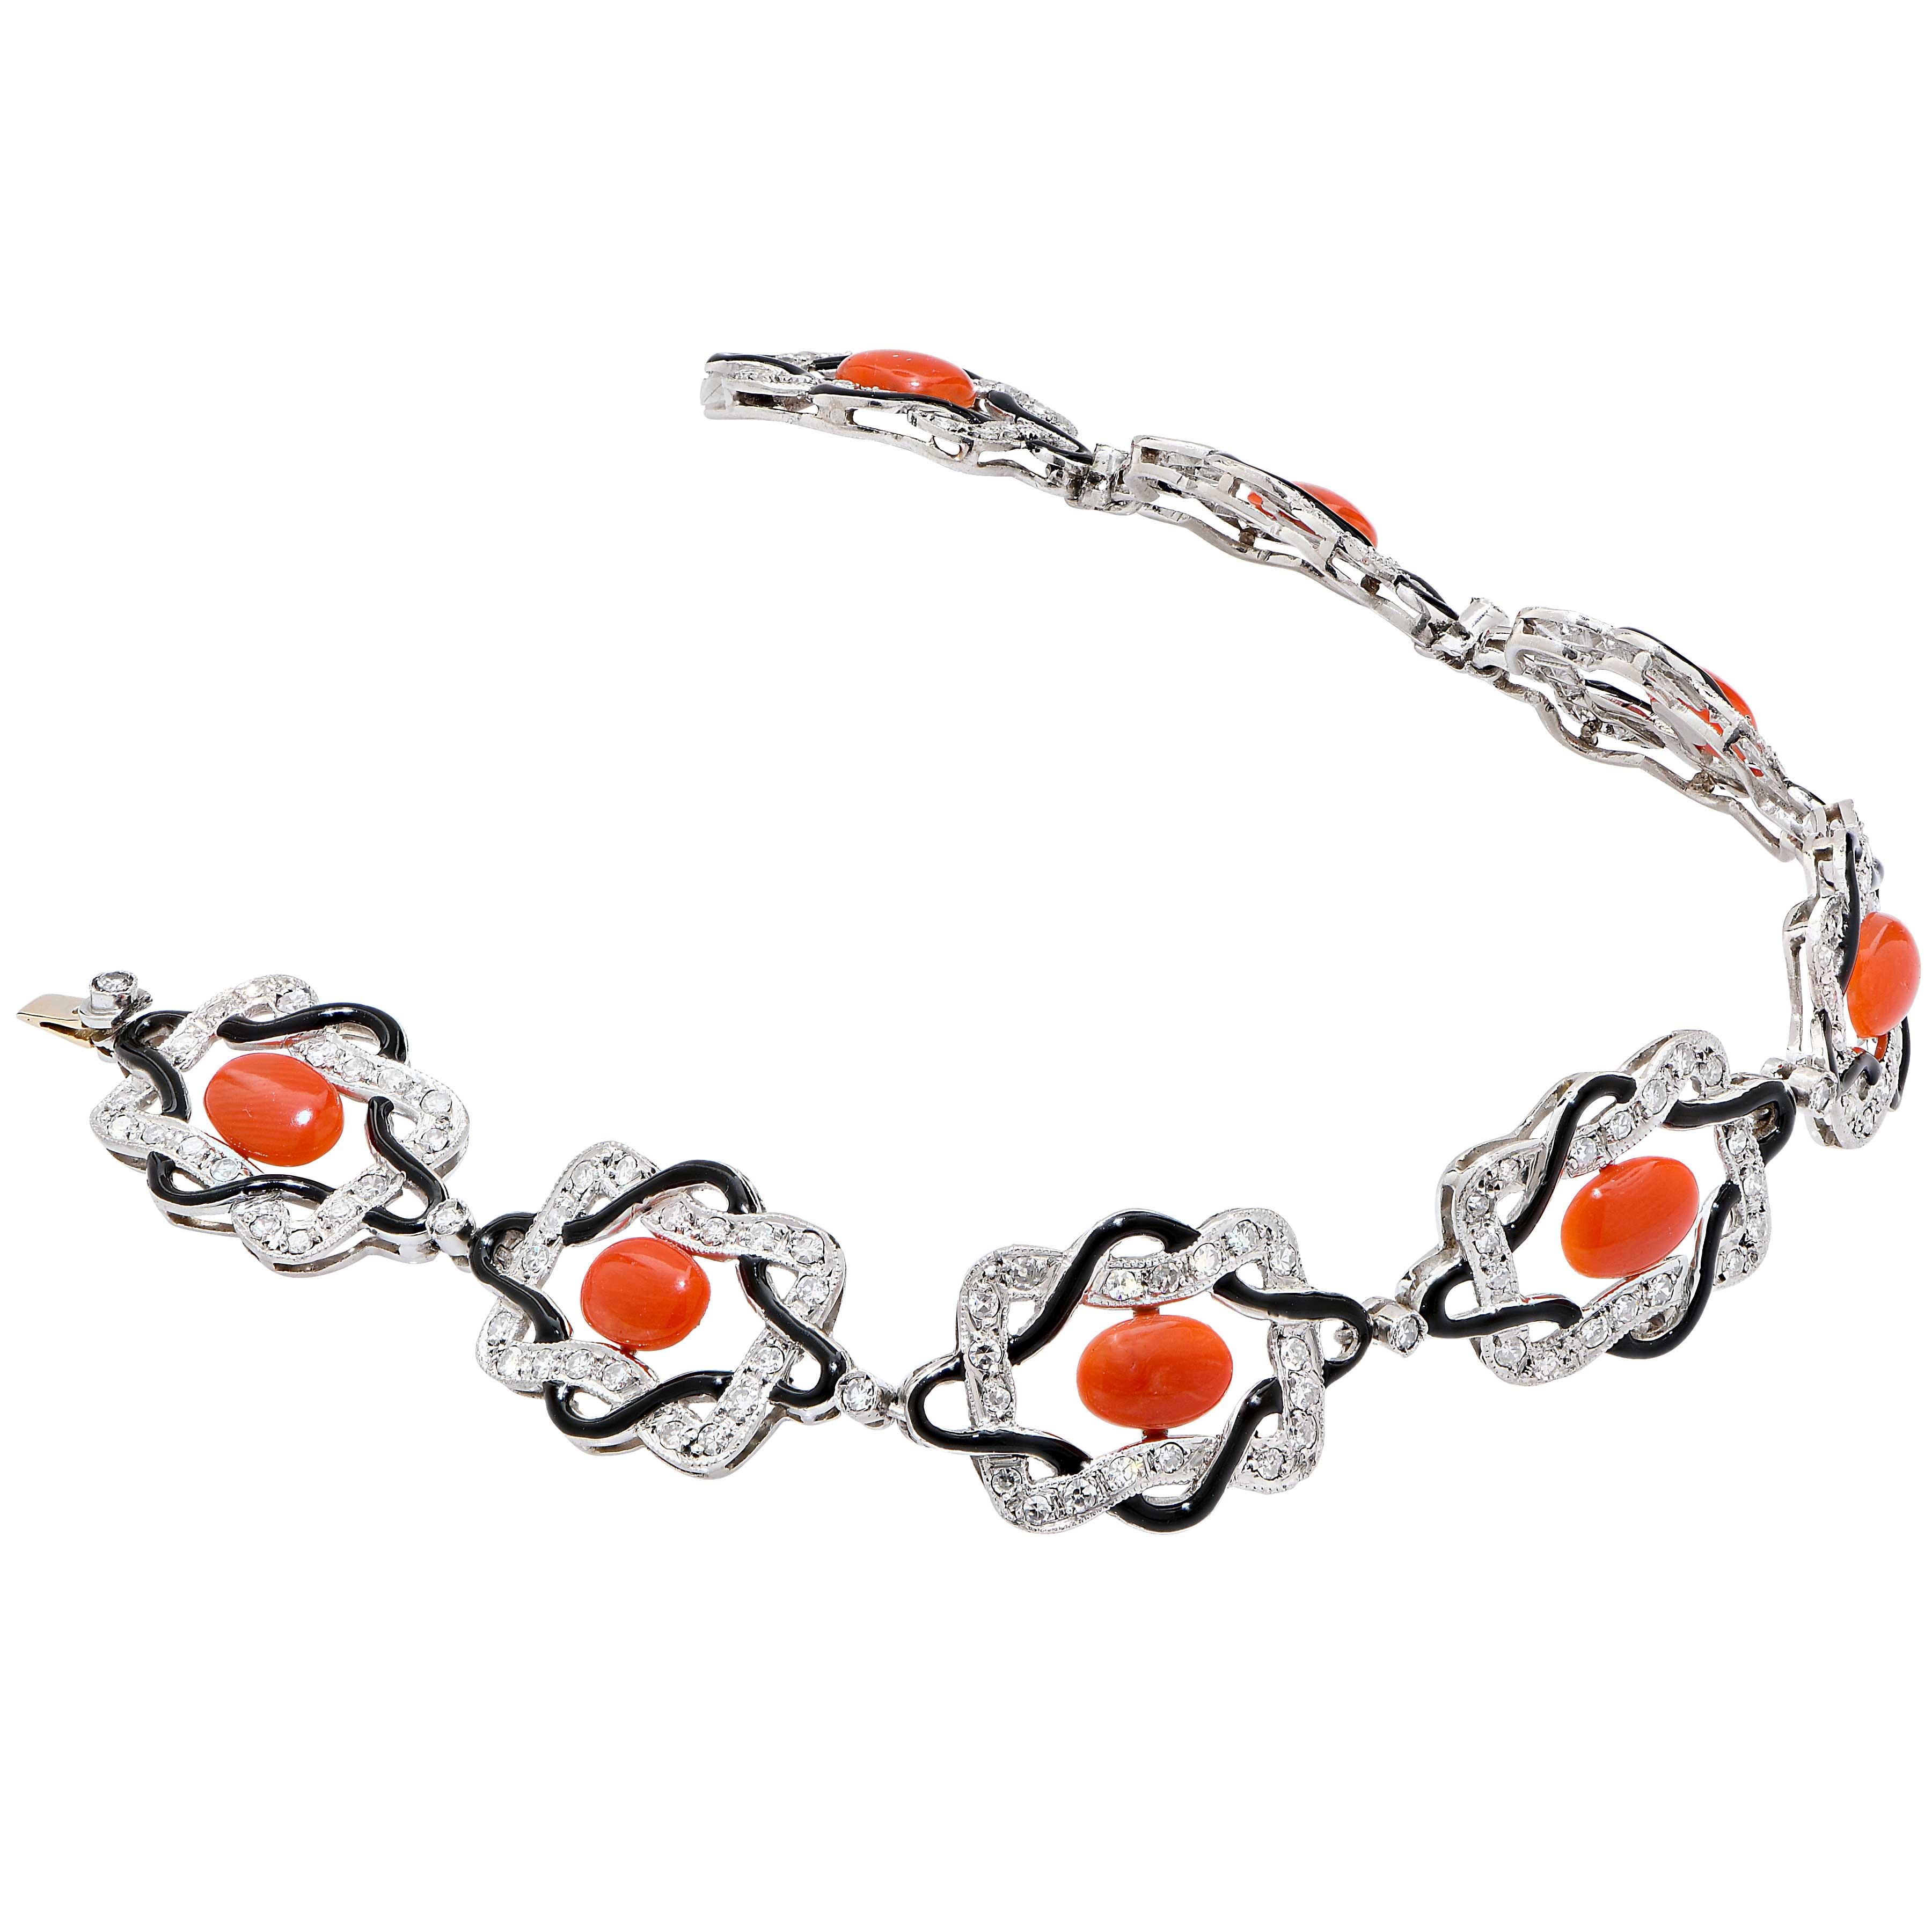 Vintage Coral, Diamond and Enamel Platinum Bracelet features 8 oval cabochon cut coral pieces and 152 single cut diamonds with an estimated total weight of 1.5 carats.
Bracelet Length: 7 1/8 inches
Metal Type: Platinum
Metal Weight: 16.5 Grams